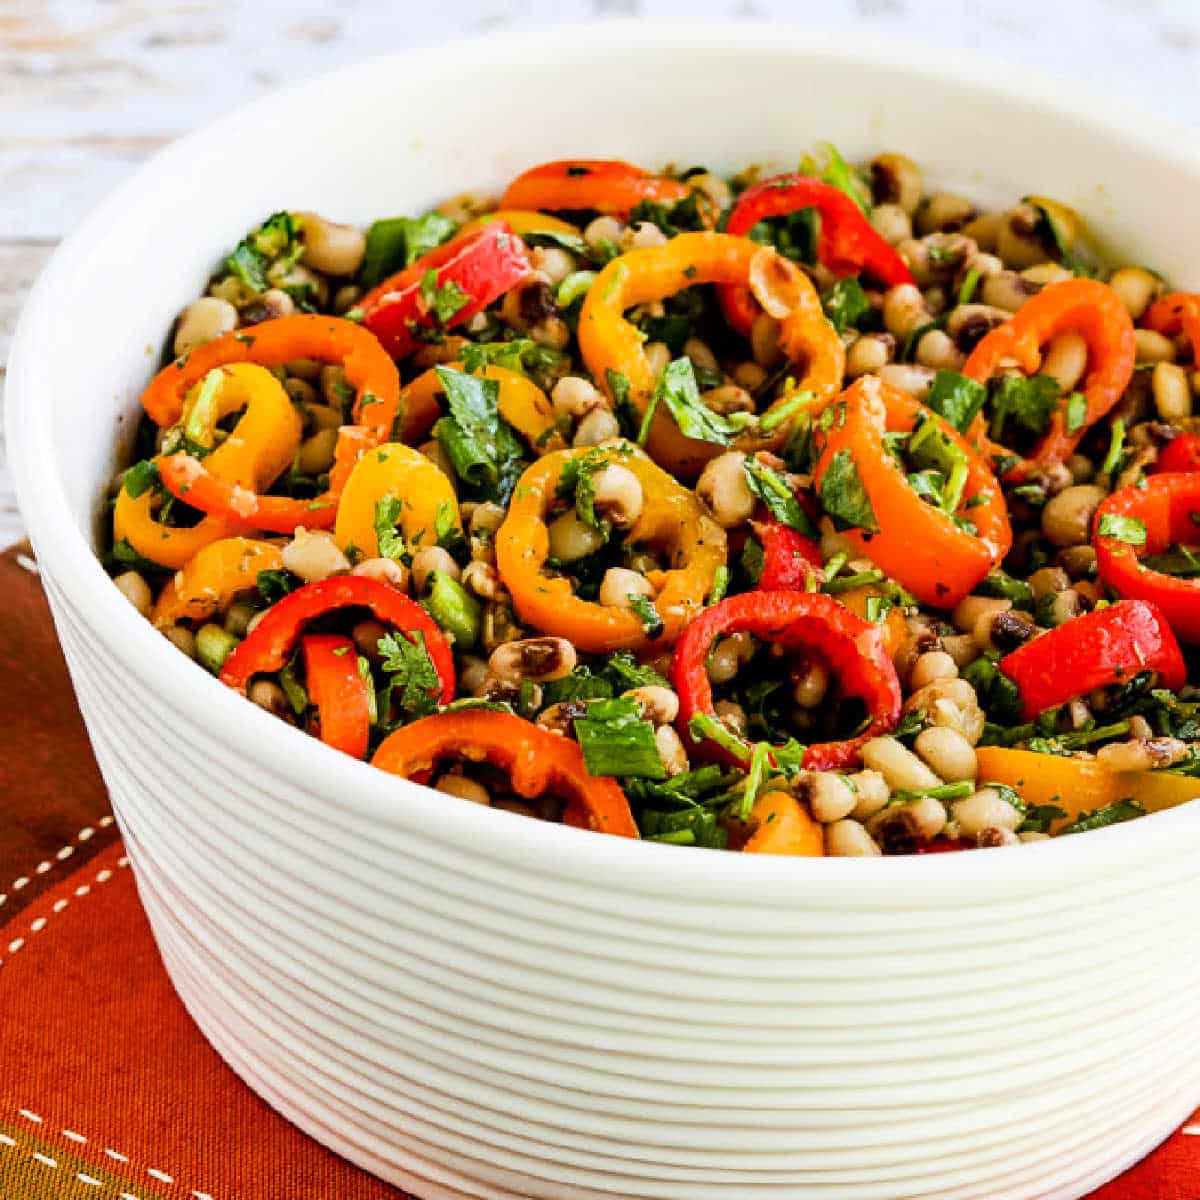 Square image of Black-Eyed Pea Salad with Peppers, Cilantro, and Cumin-Lime Vinaigrette shown in white bowl on napkin.